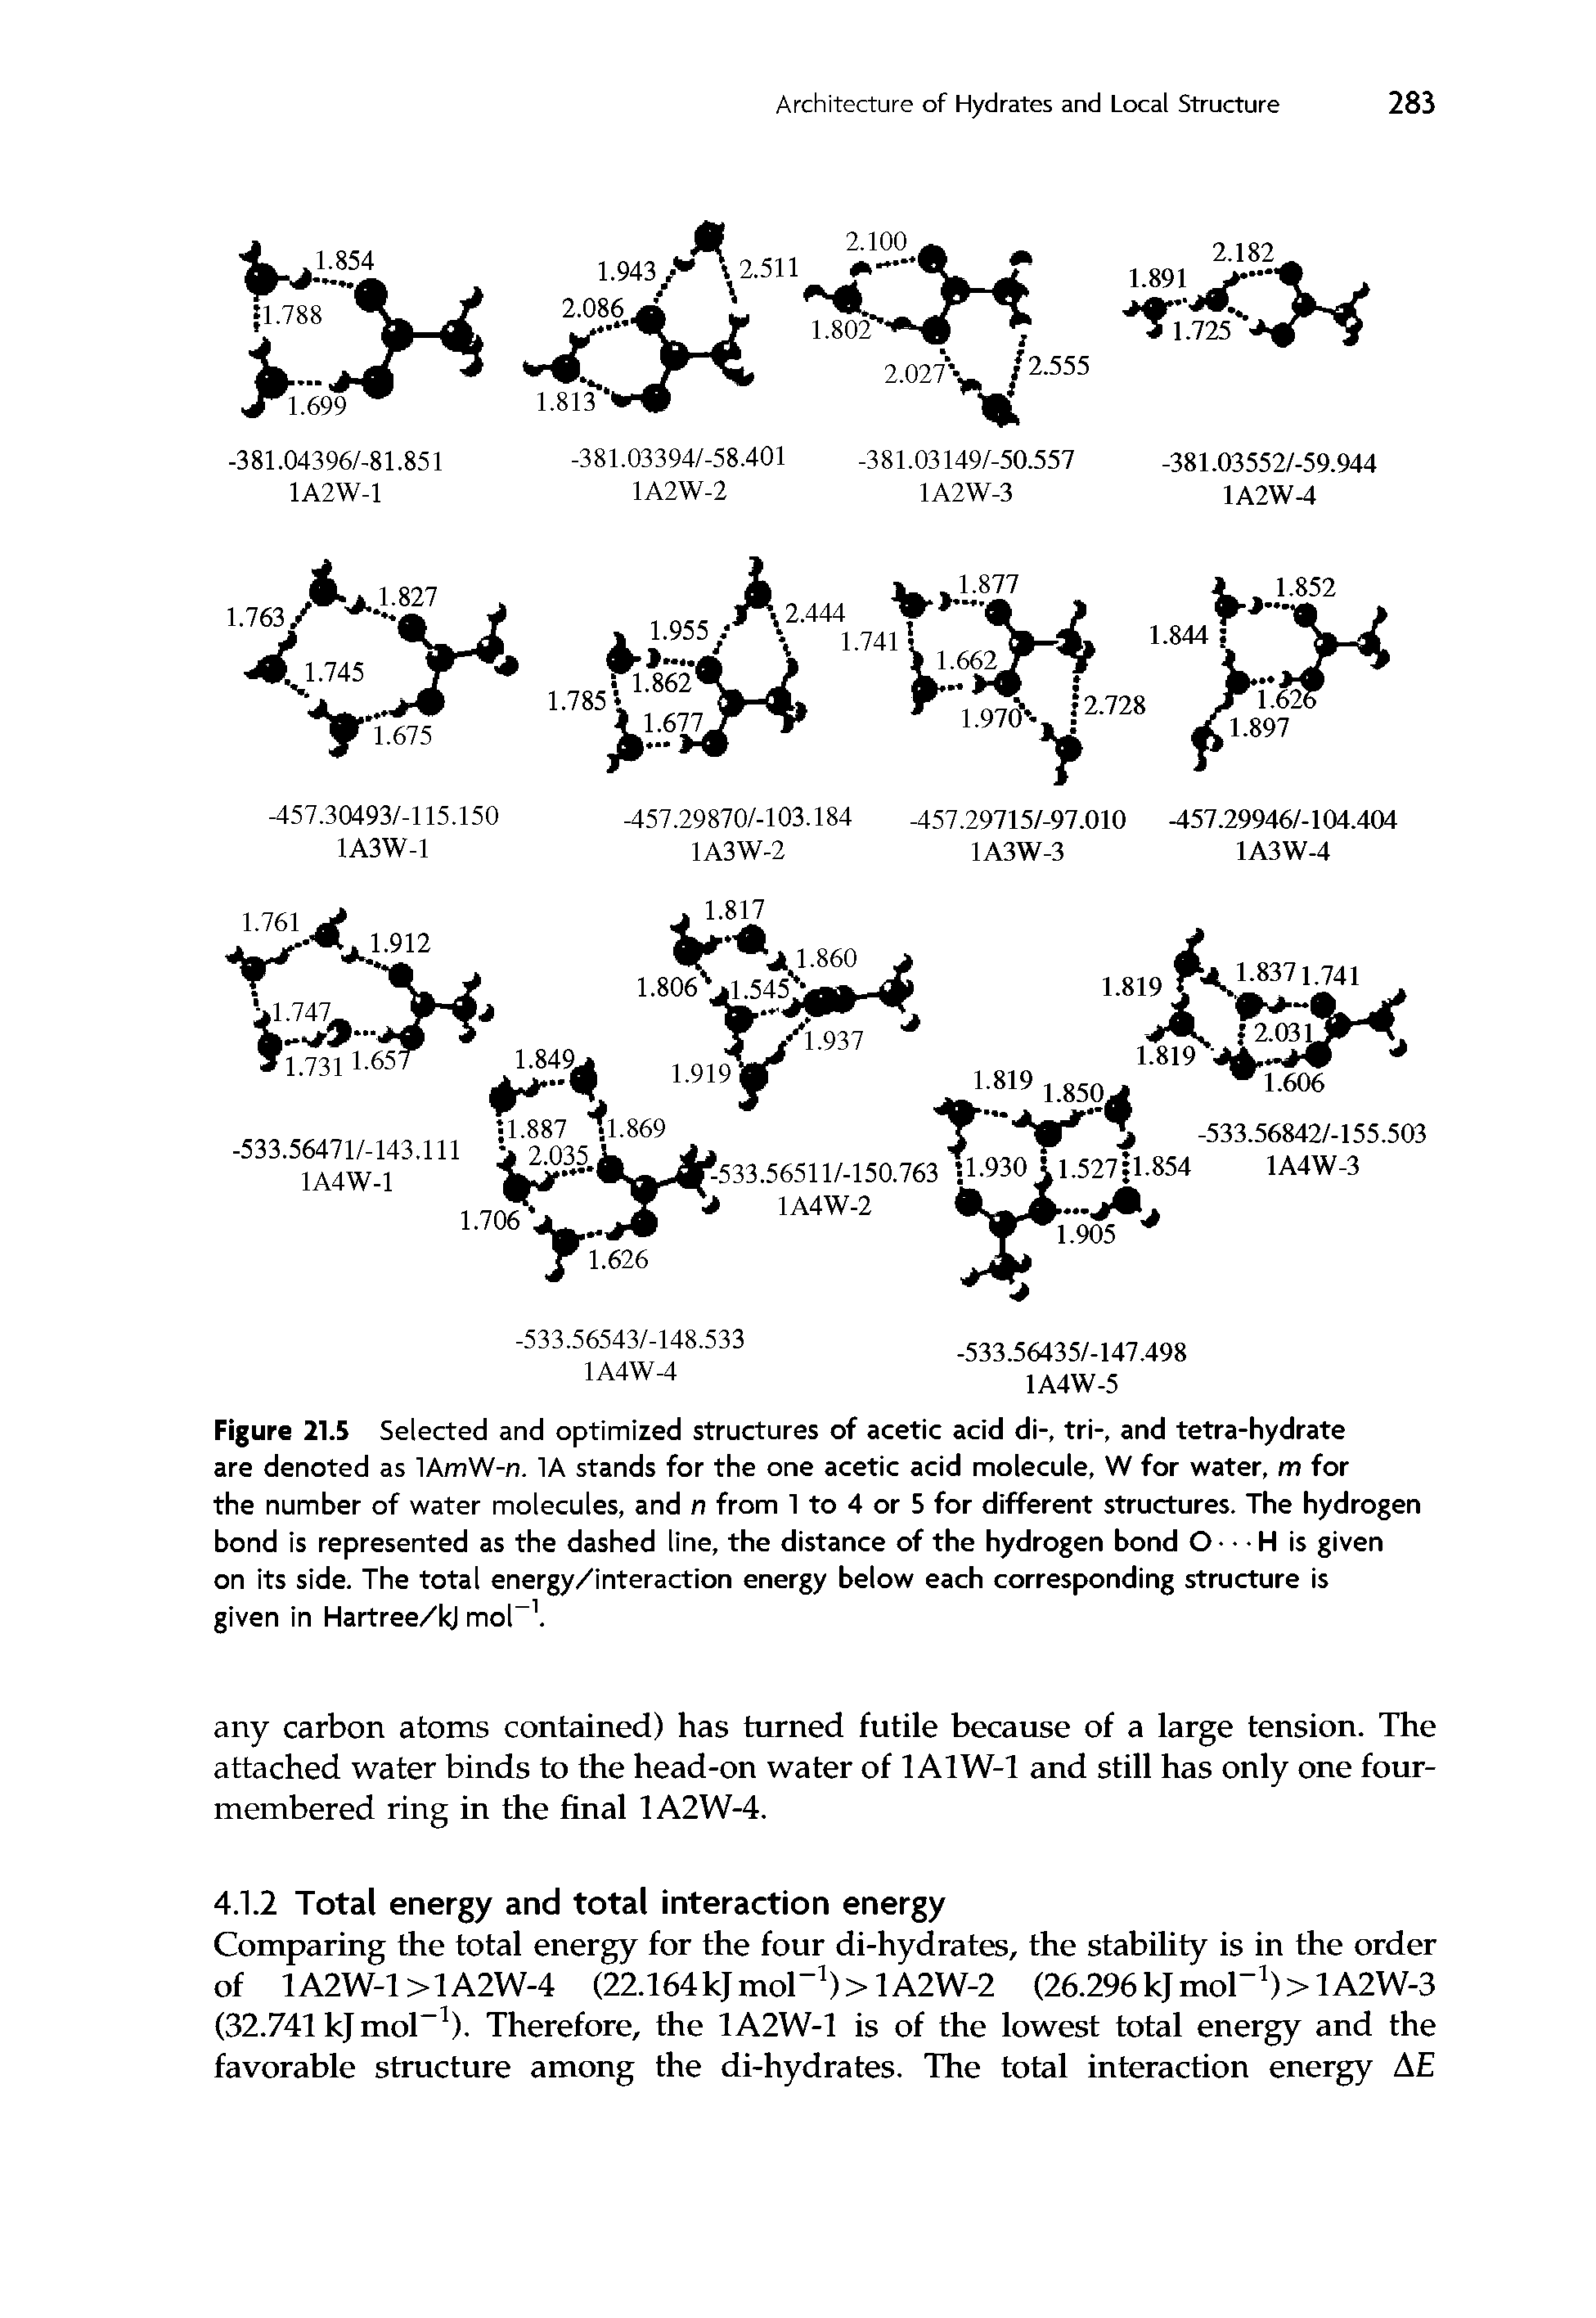 Figure 21.5 Selected and optimized structures of acetic acid di-, tri-, and tetra-hydrate are denoted as lAmW-n. 1A stands for the one acetic acid molecule, W for water, m for the number of water molecules, and n from 1 to 4 or 5 for different structures. The hydrogen bond is represented as the dashed line, the distance of the hydrogen bond O H is given on its side. The total energy/interaction energy below each corresponding structure is given in Hartree/kJ mol-1.